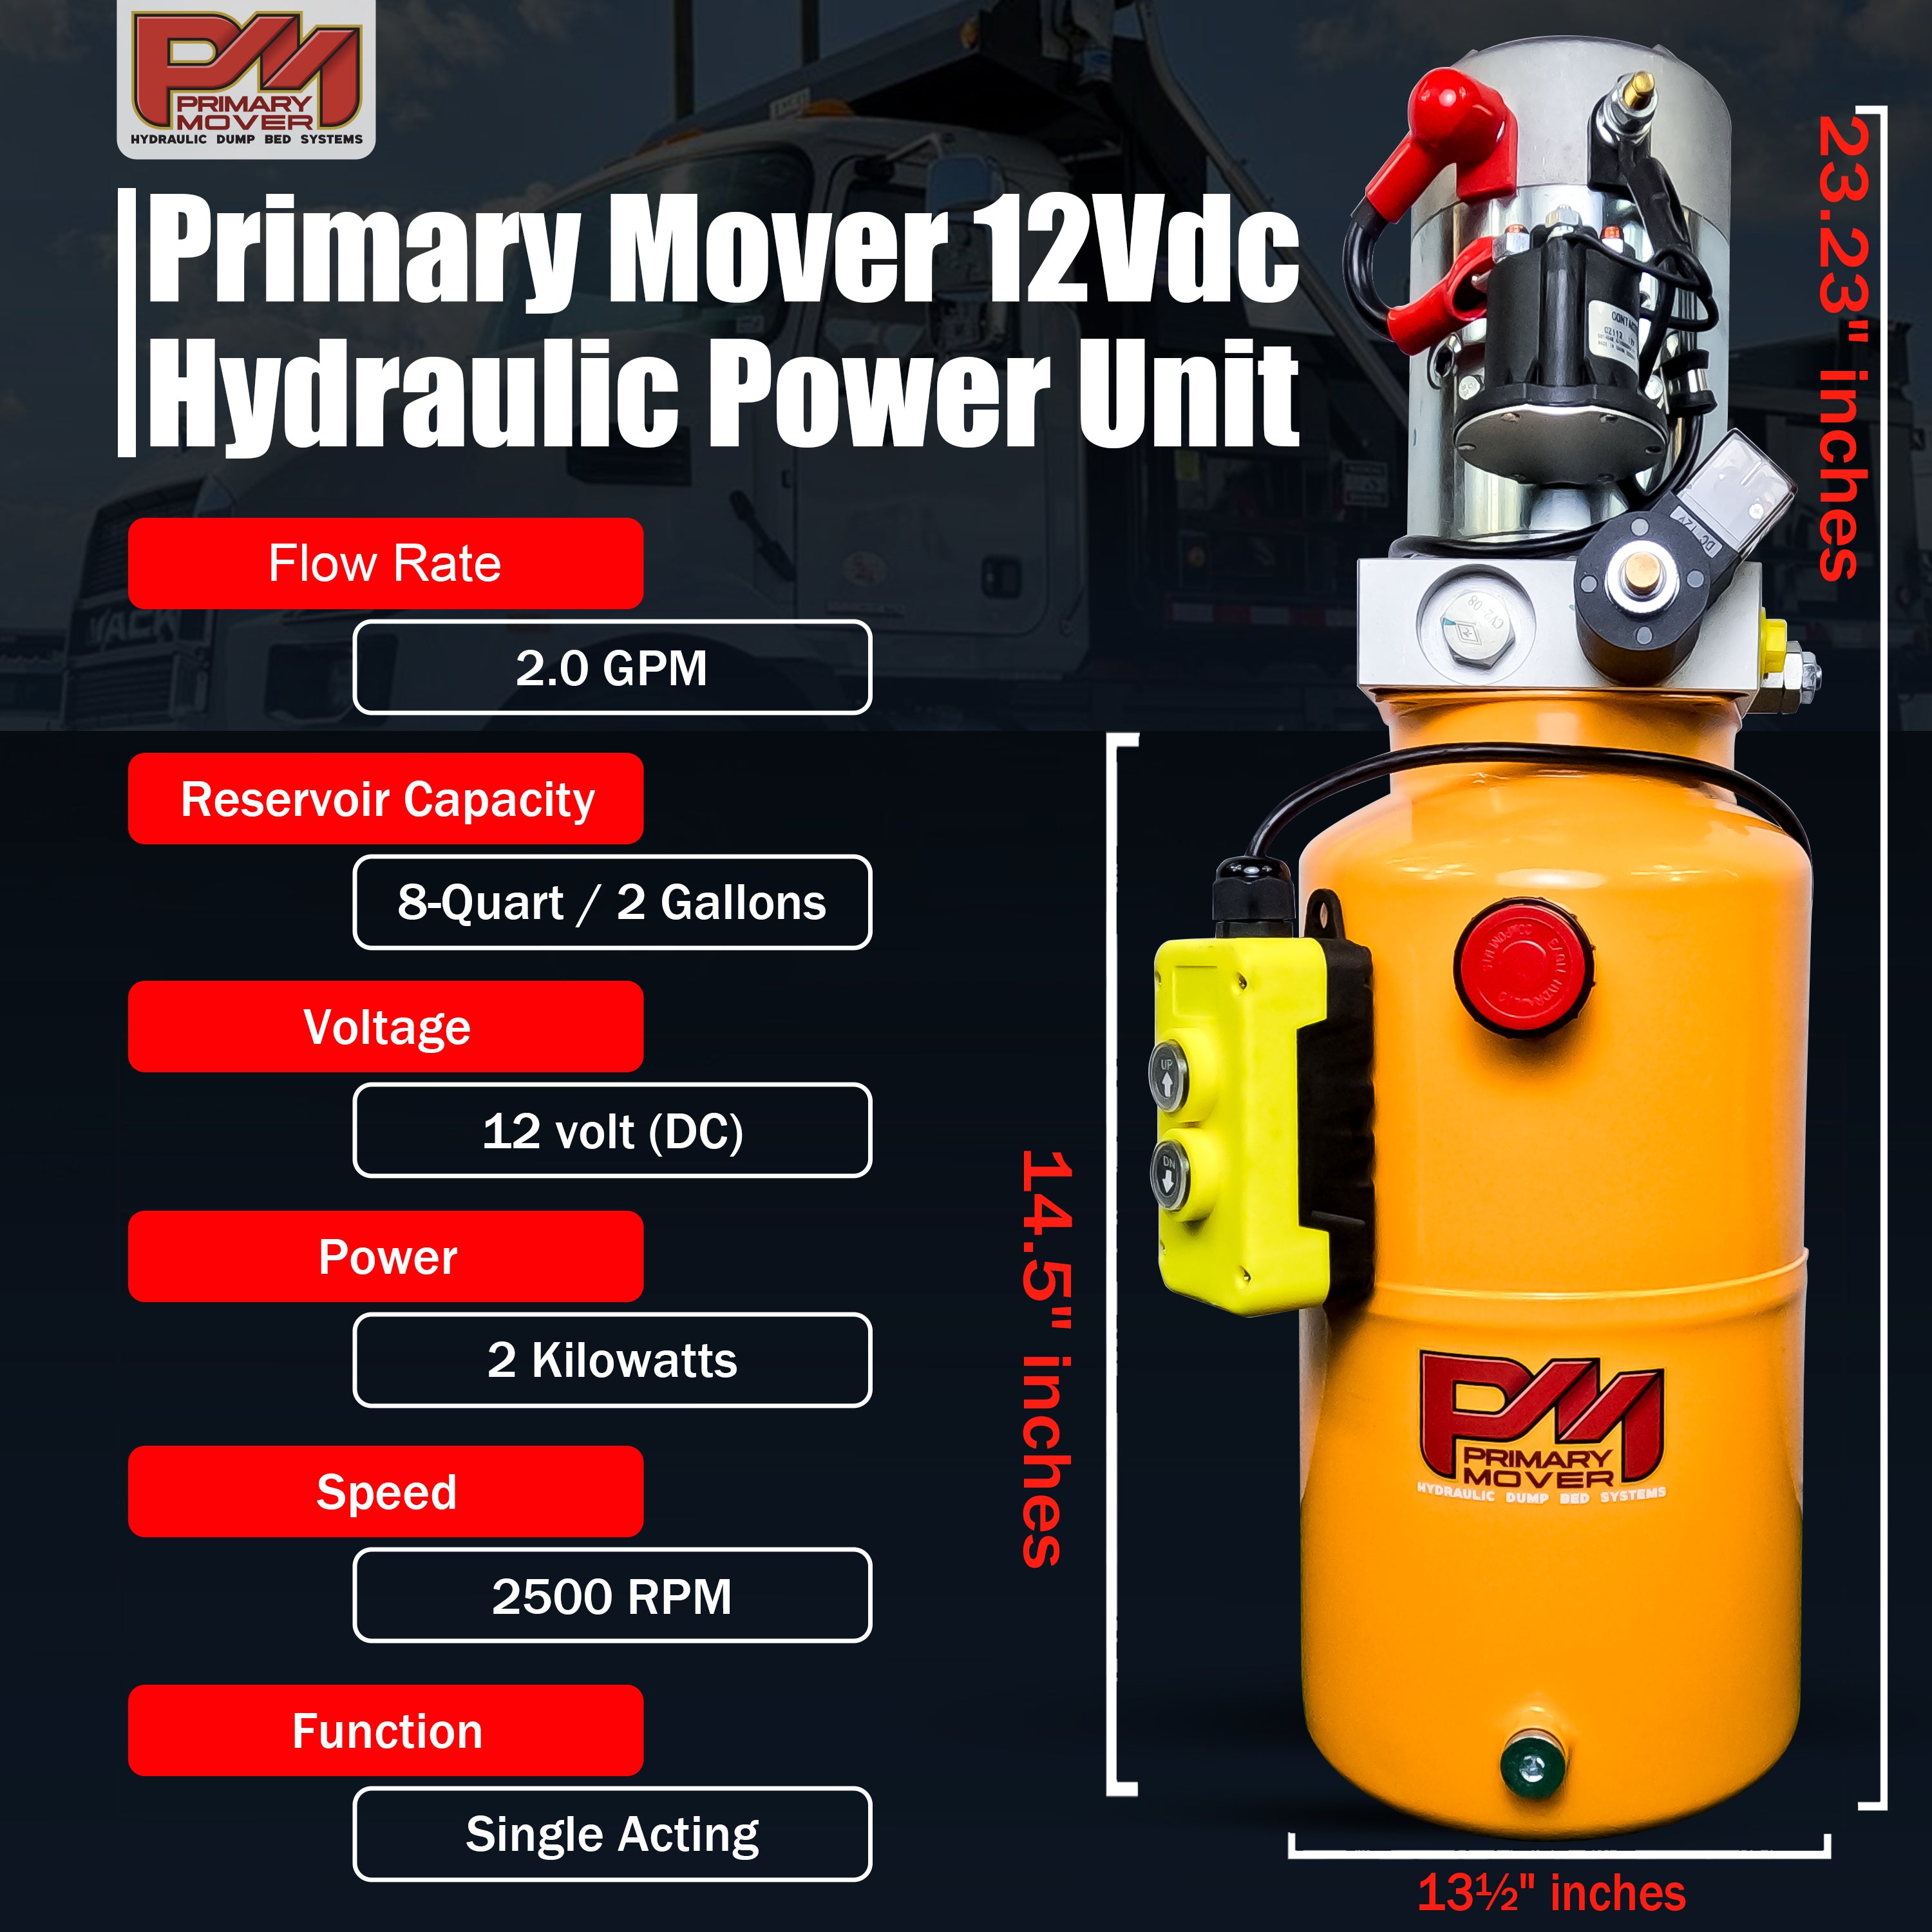 Primary Mover 12V Single-Acting Hydraulic Pump with Steel Reservoir, designed for hydraulic dump bed systems, offers precision and durability.